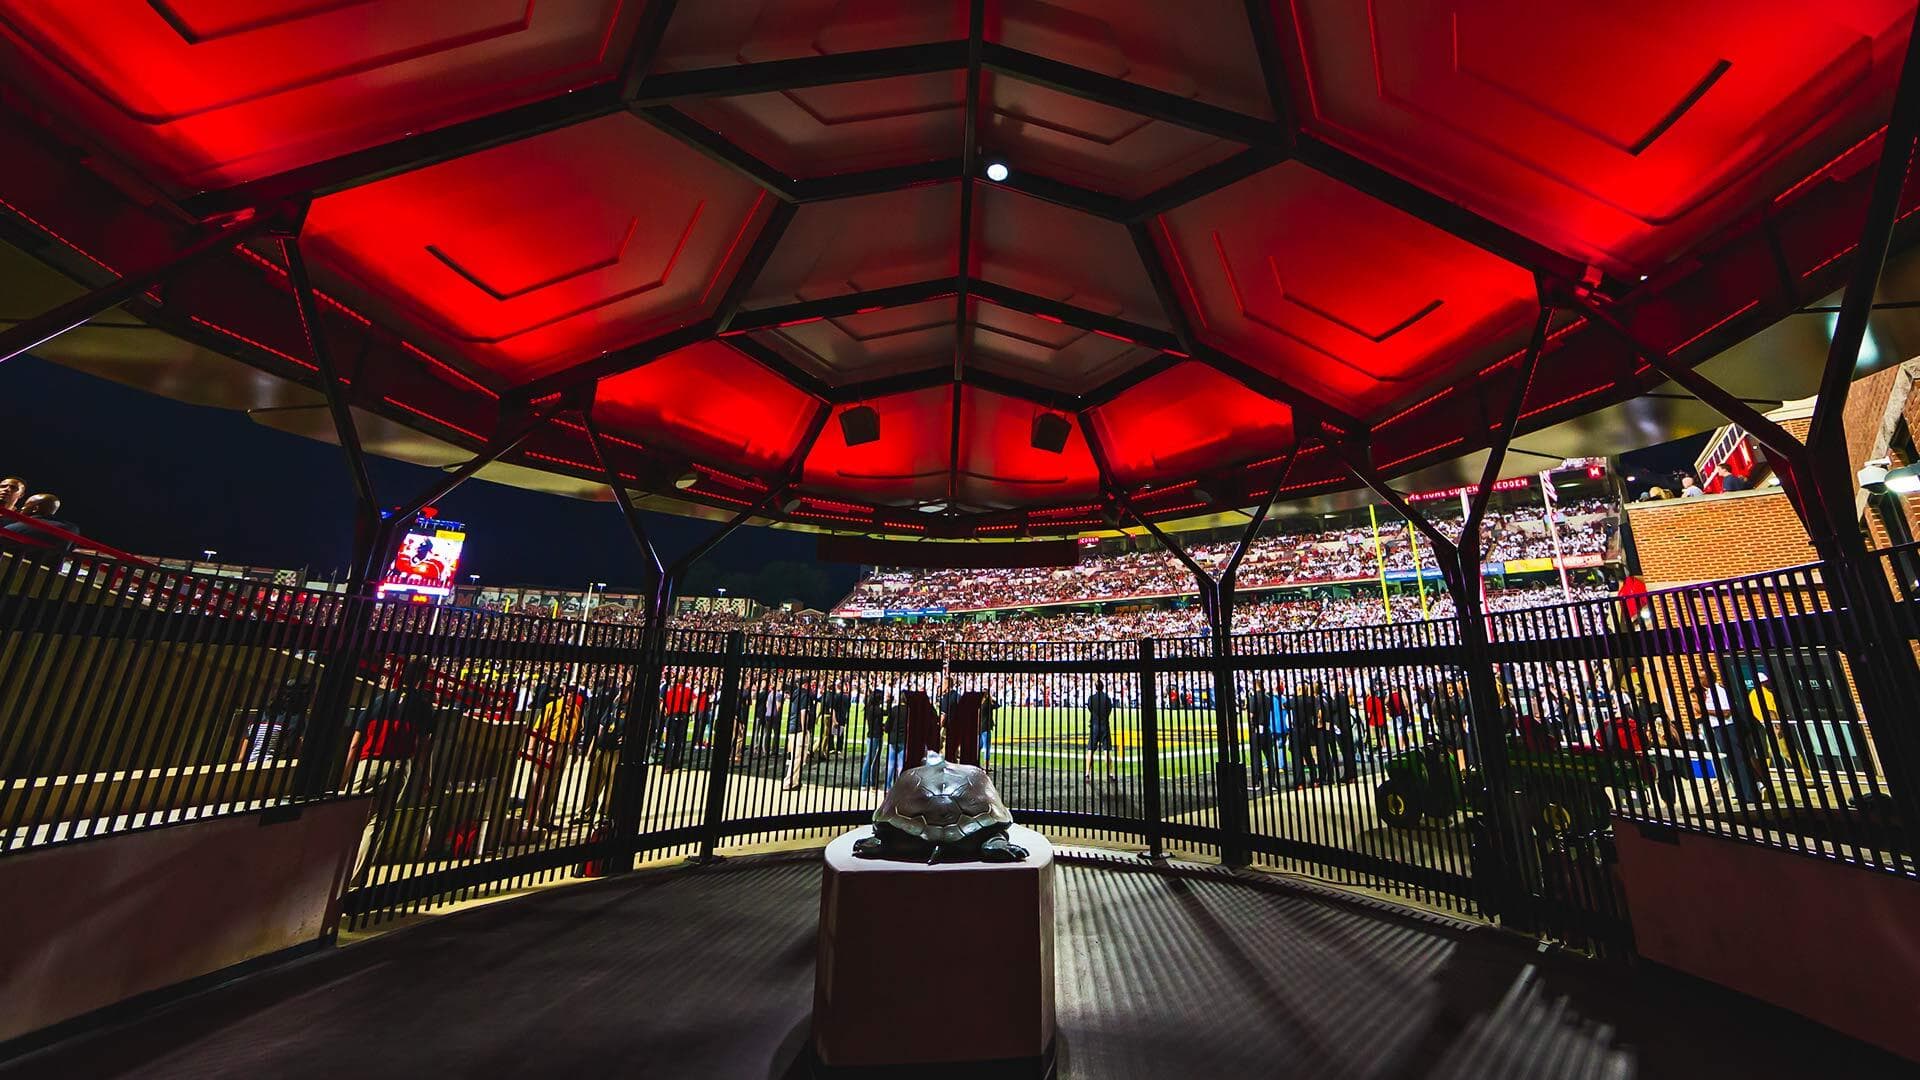 The turtle-shell-shaped Butler tunnel at Maryland Stadium lights up red